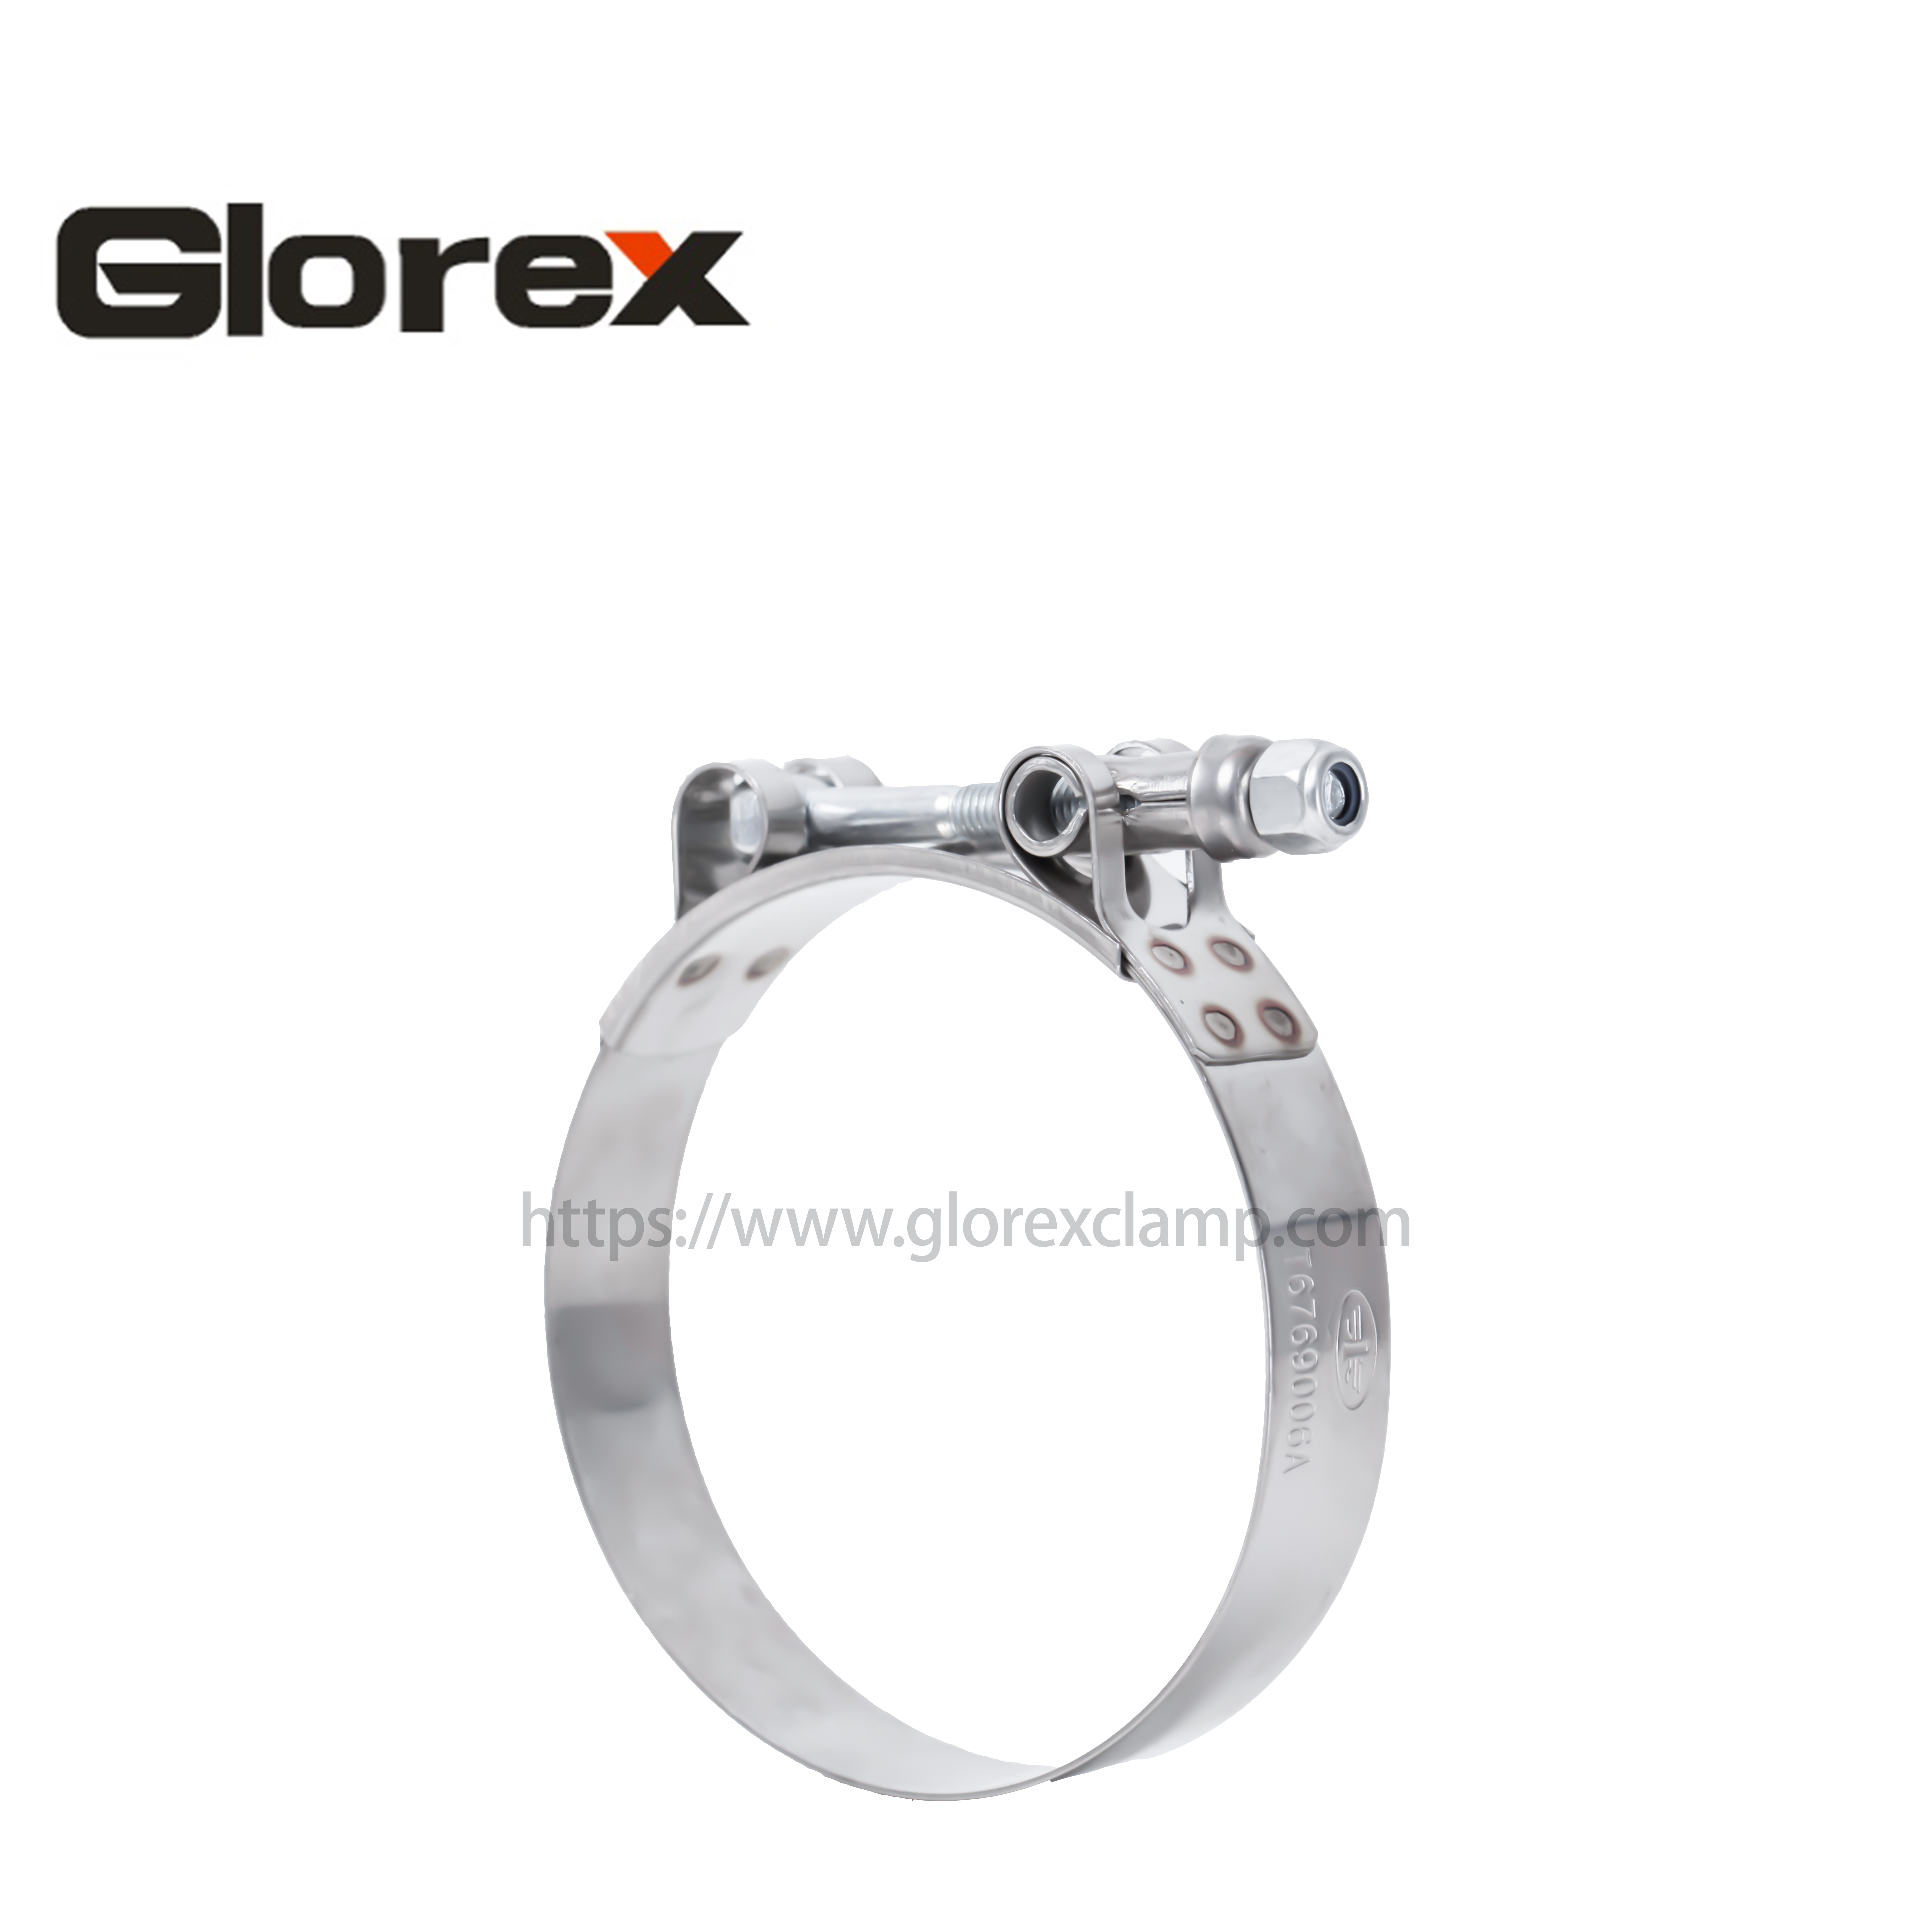 Europe style for 3 Inch Hose Clamp - T-bolt clamp – Glorex Featured Image